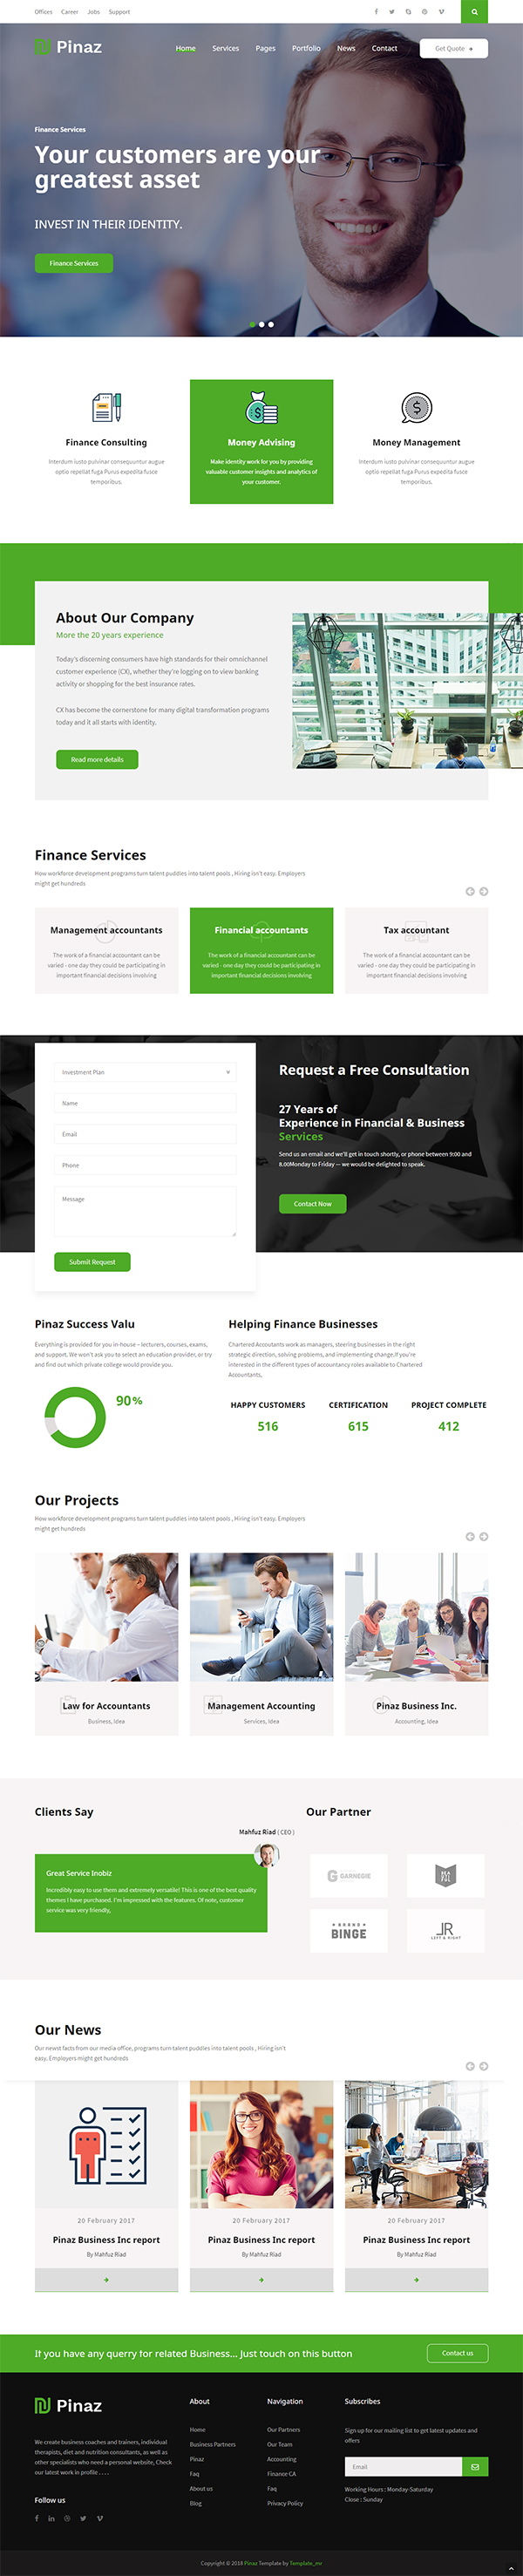 Pinaz - Corporate and Finance HTML Template